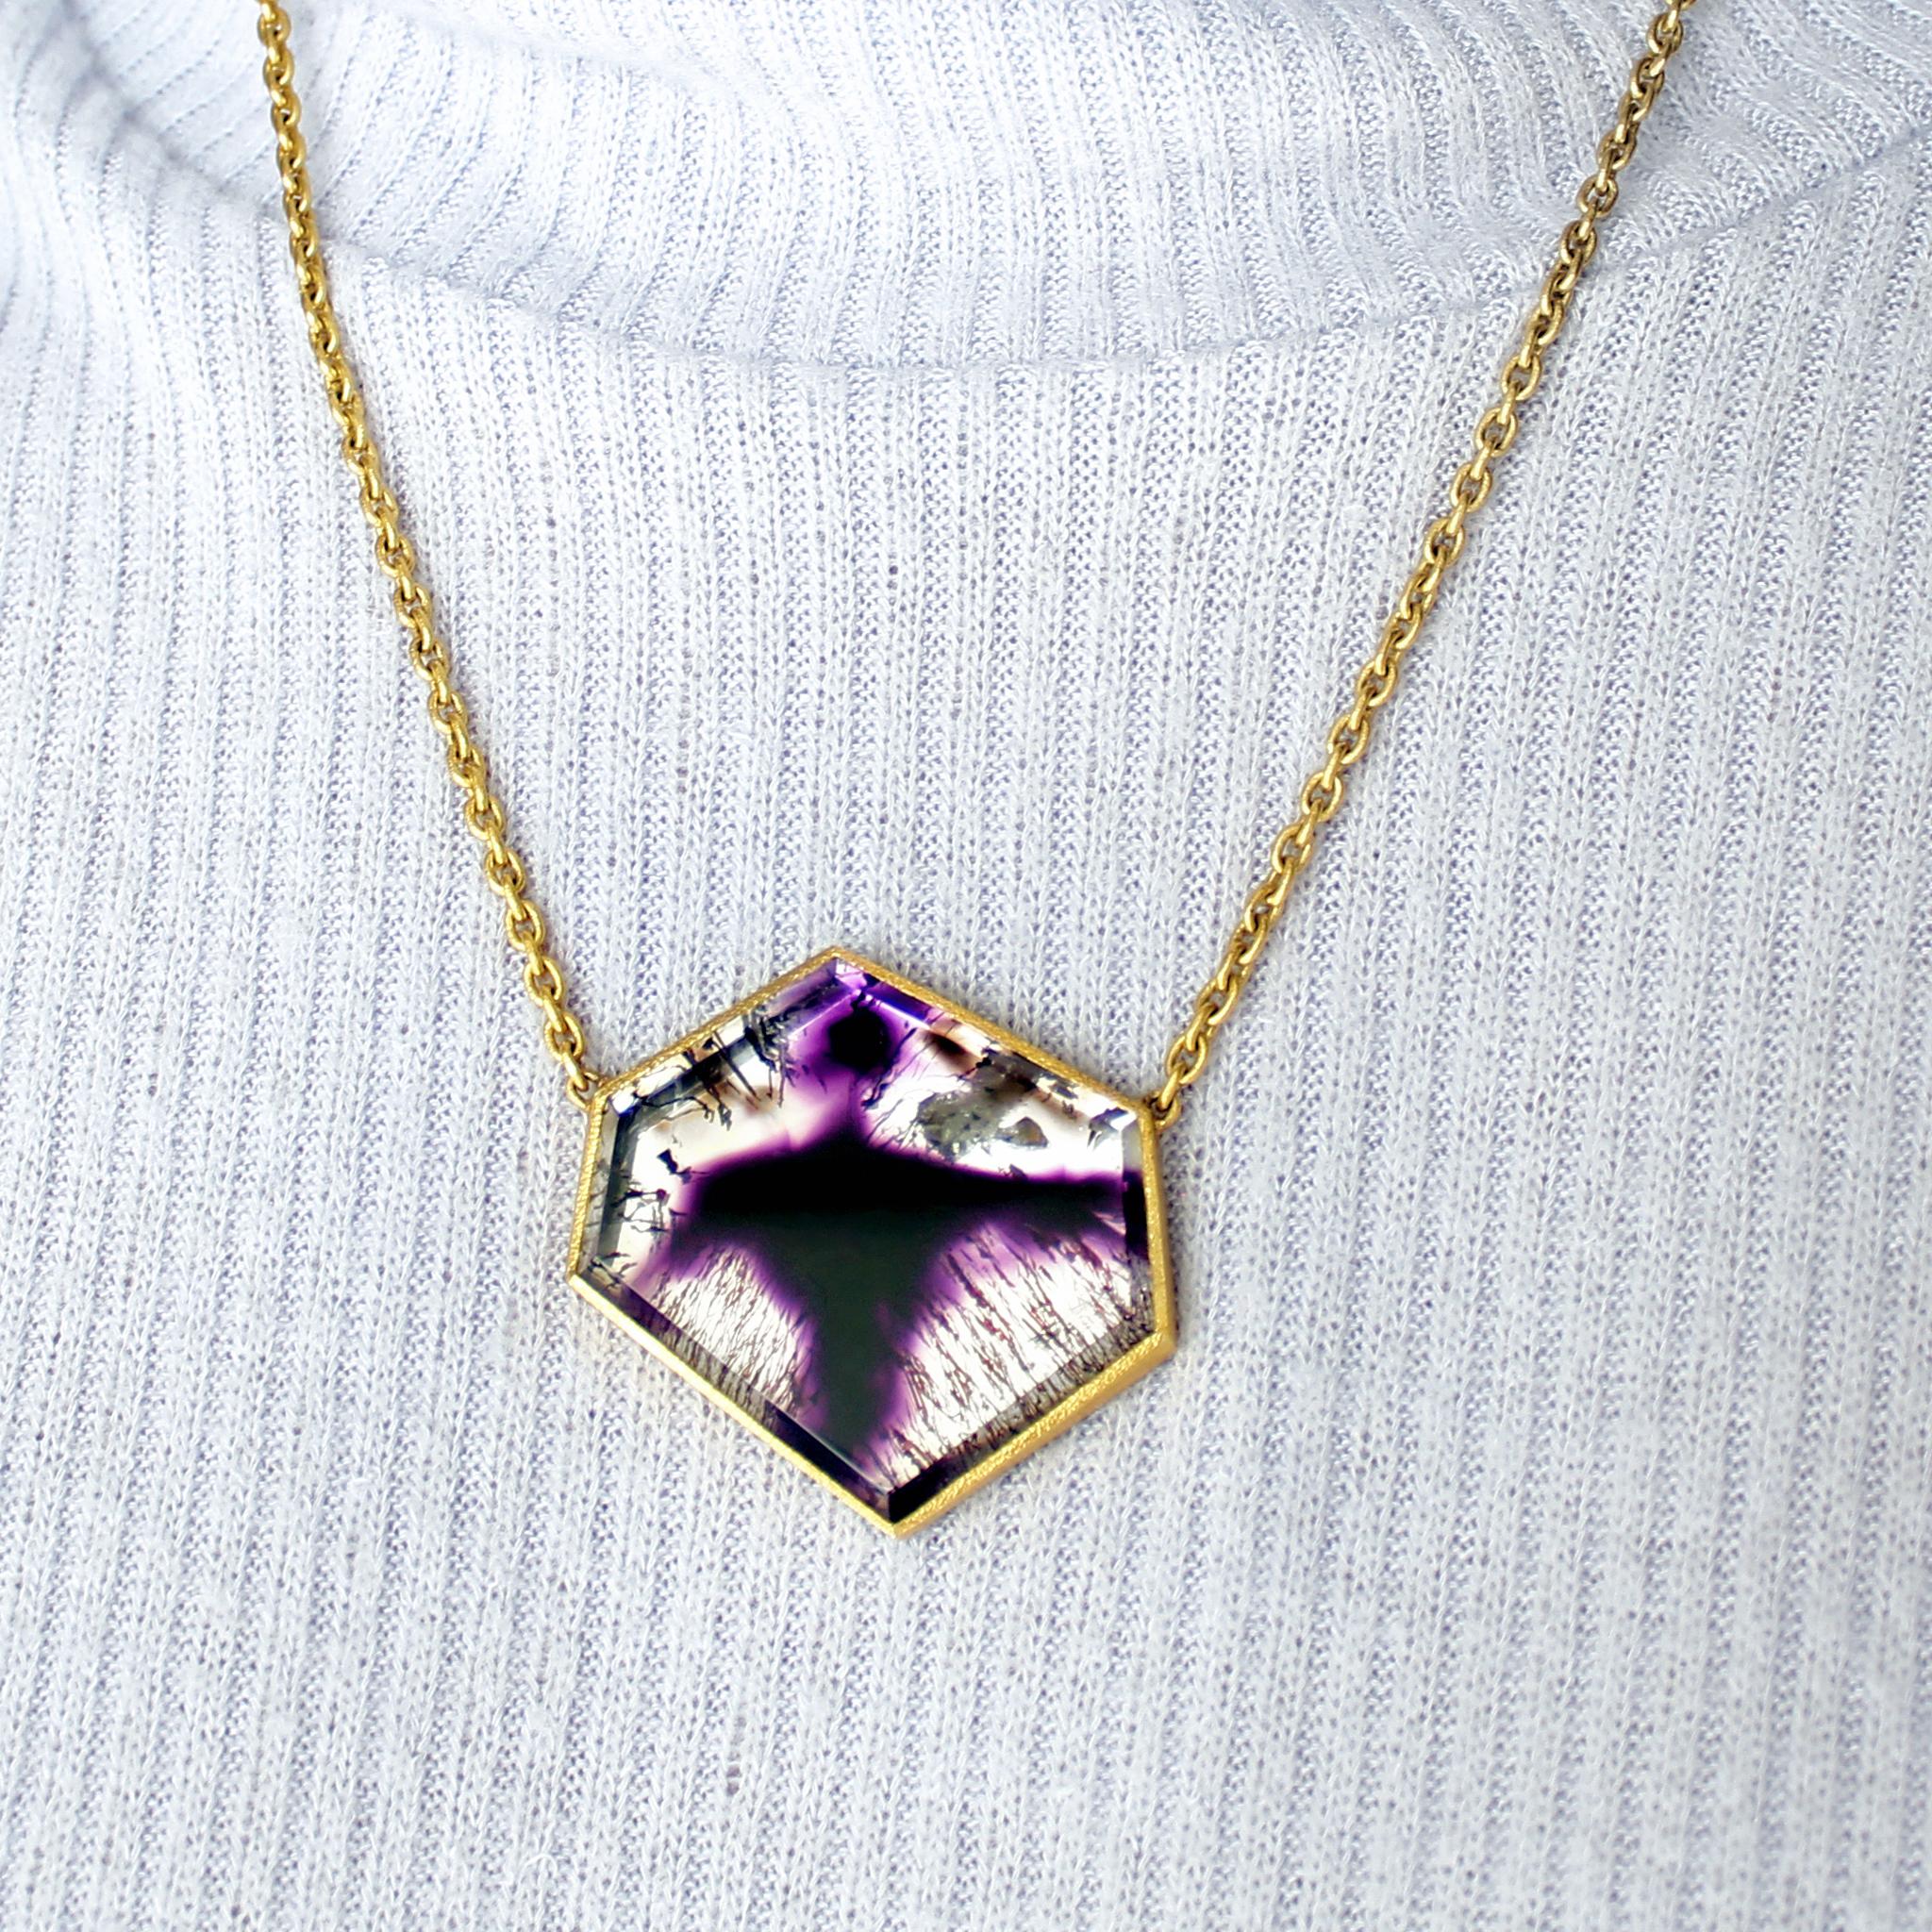 One of a Kind Amethyst Shadow Necklace handcrafted by jewelry maker Devta Doolan in signature-finished 22k yellow gold showcasing a remarkable gemstone with an extraordinarily-rare growth formation of amethyst within a quartz crystal, complemented